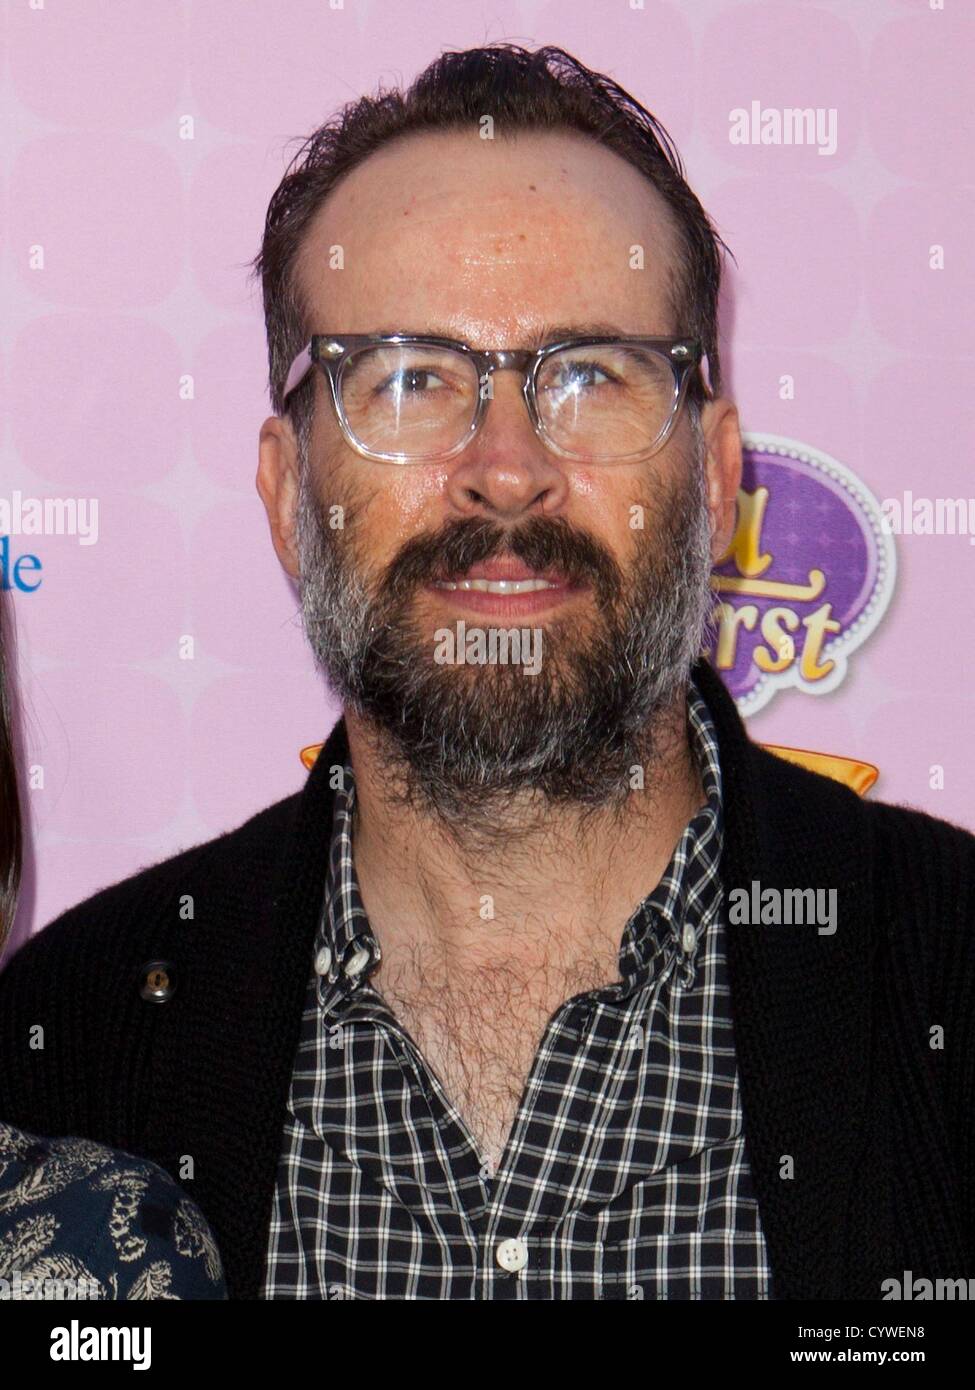 Jason Lee at arrivals for SOFIA THE FIRST: ONCE UPON A PRINCESS Premiere, The Walt Disney Studios Lot, Burbank, CA November 10, 2012. Photo By: Emiley Schweich/Everett Collection Stock Photo